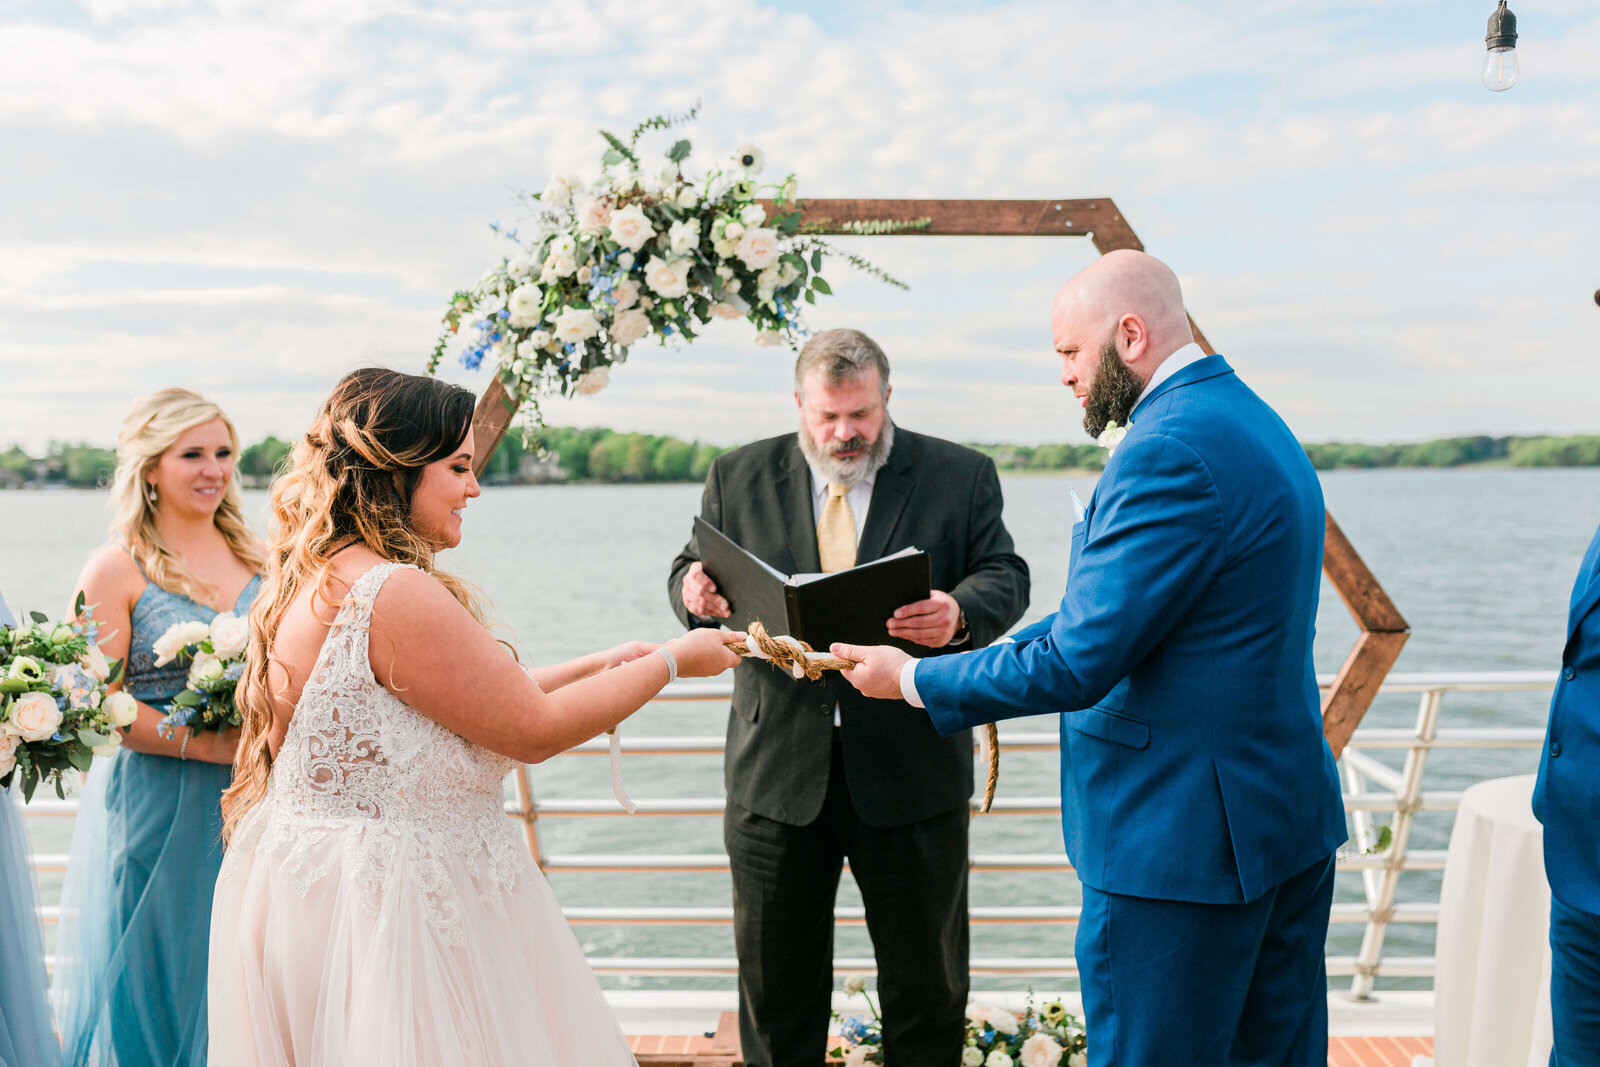 Virginia-Beach-Wedding-Planners-Sincerely-Jane-Events-8427